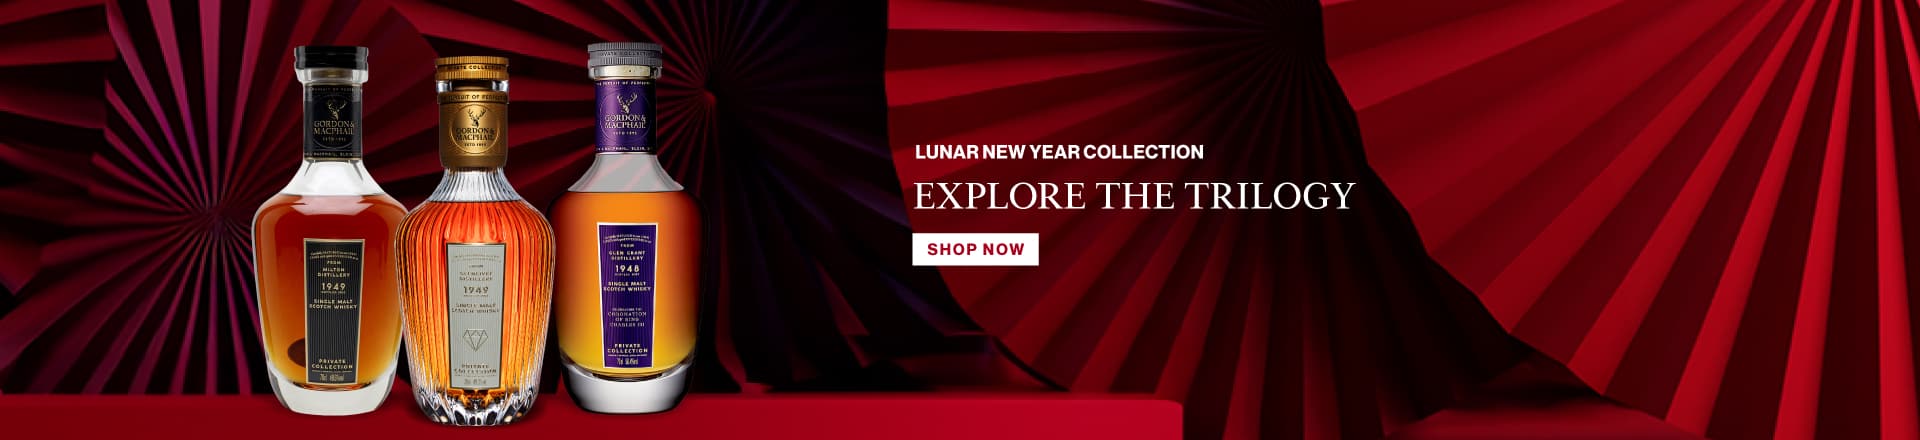 Le Clos Lunar New Year collection_banners-01